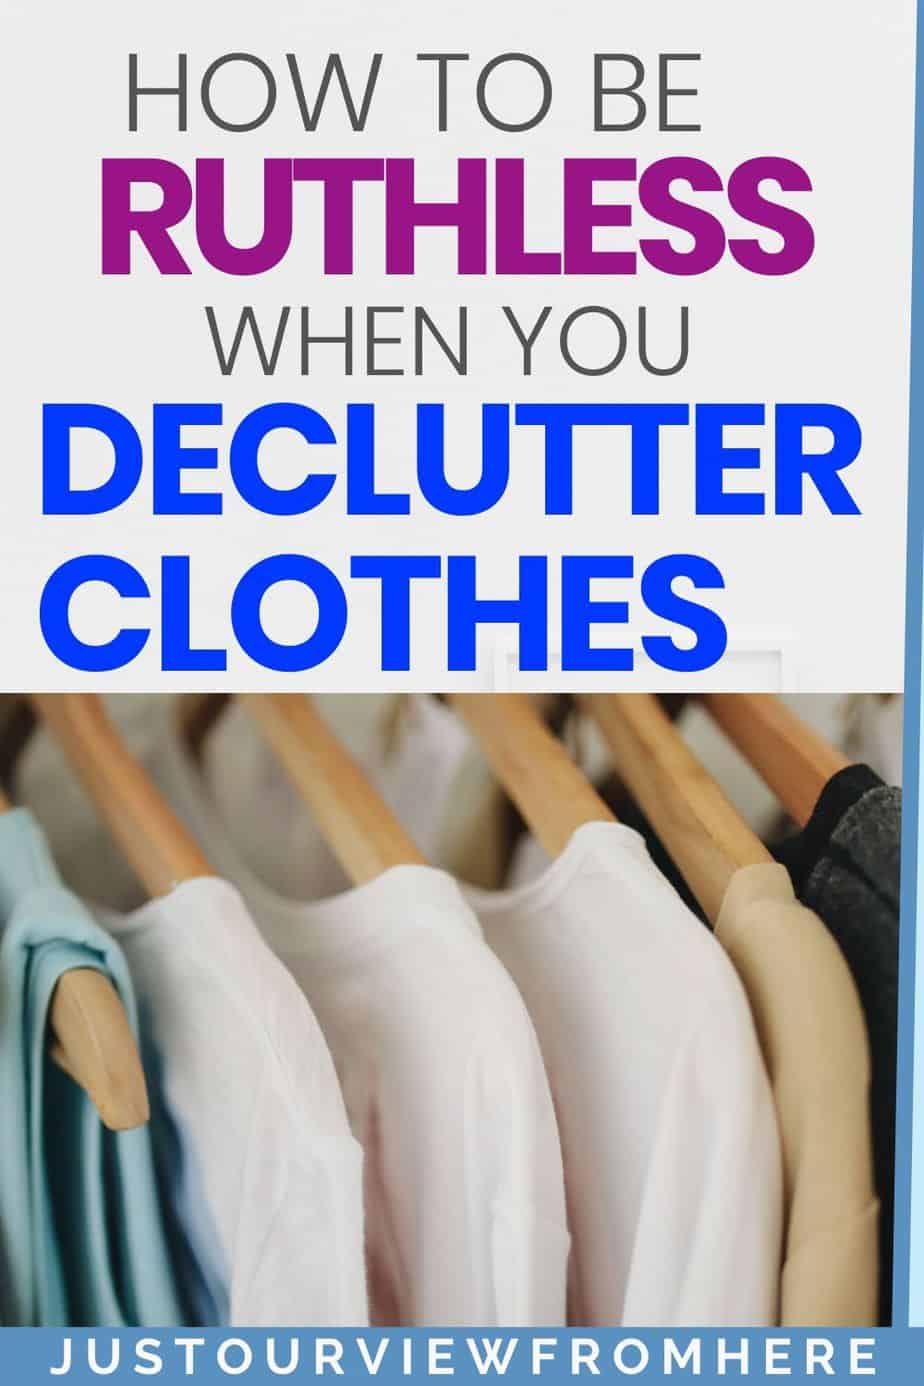 How To Be Ruthless When Decluttering Clothes ~Just Our View From Here